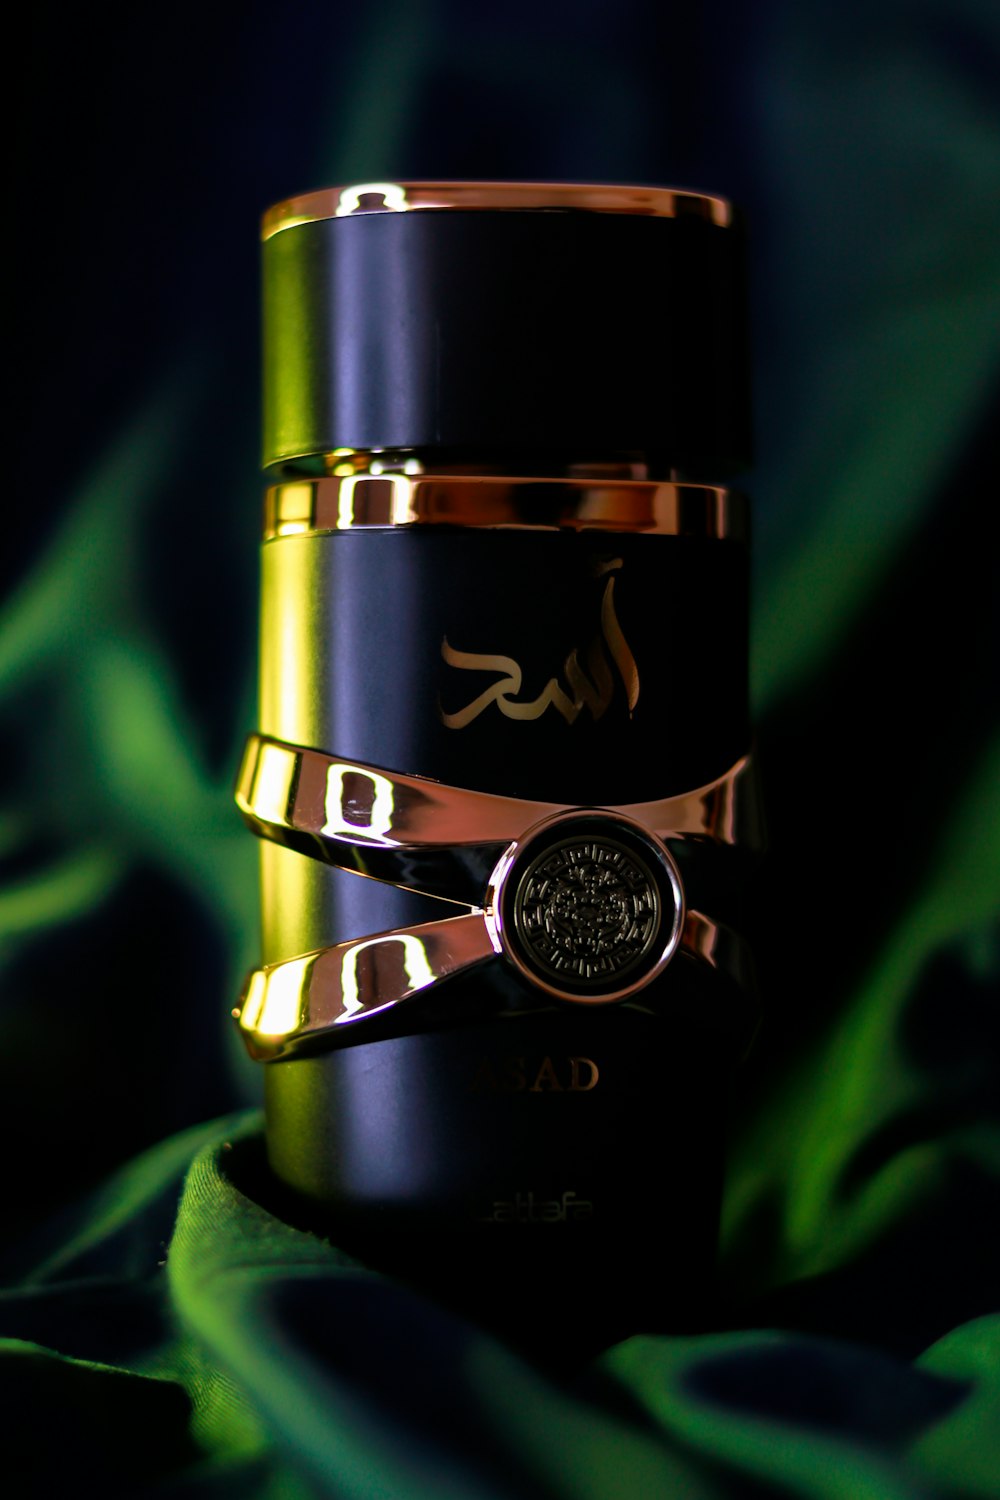 a gold and black stack of rings on a green cloth